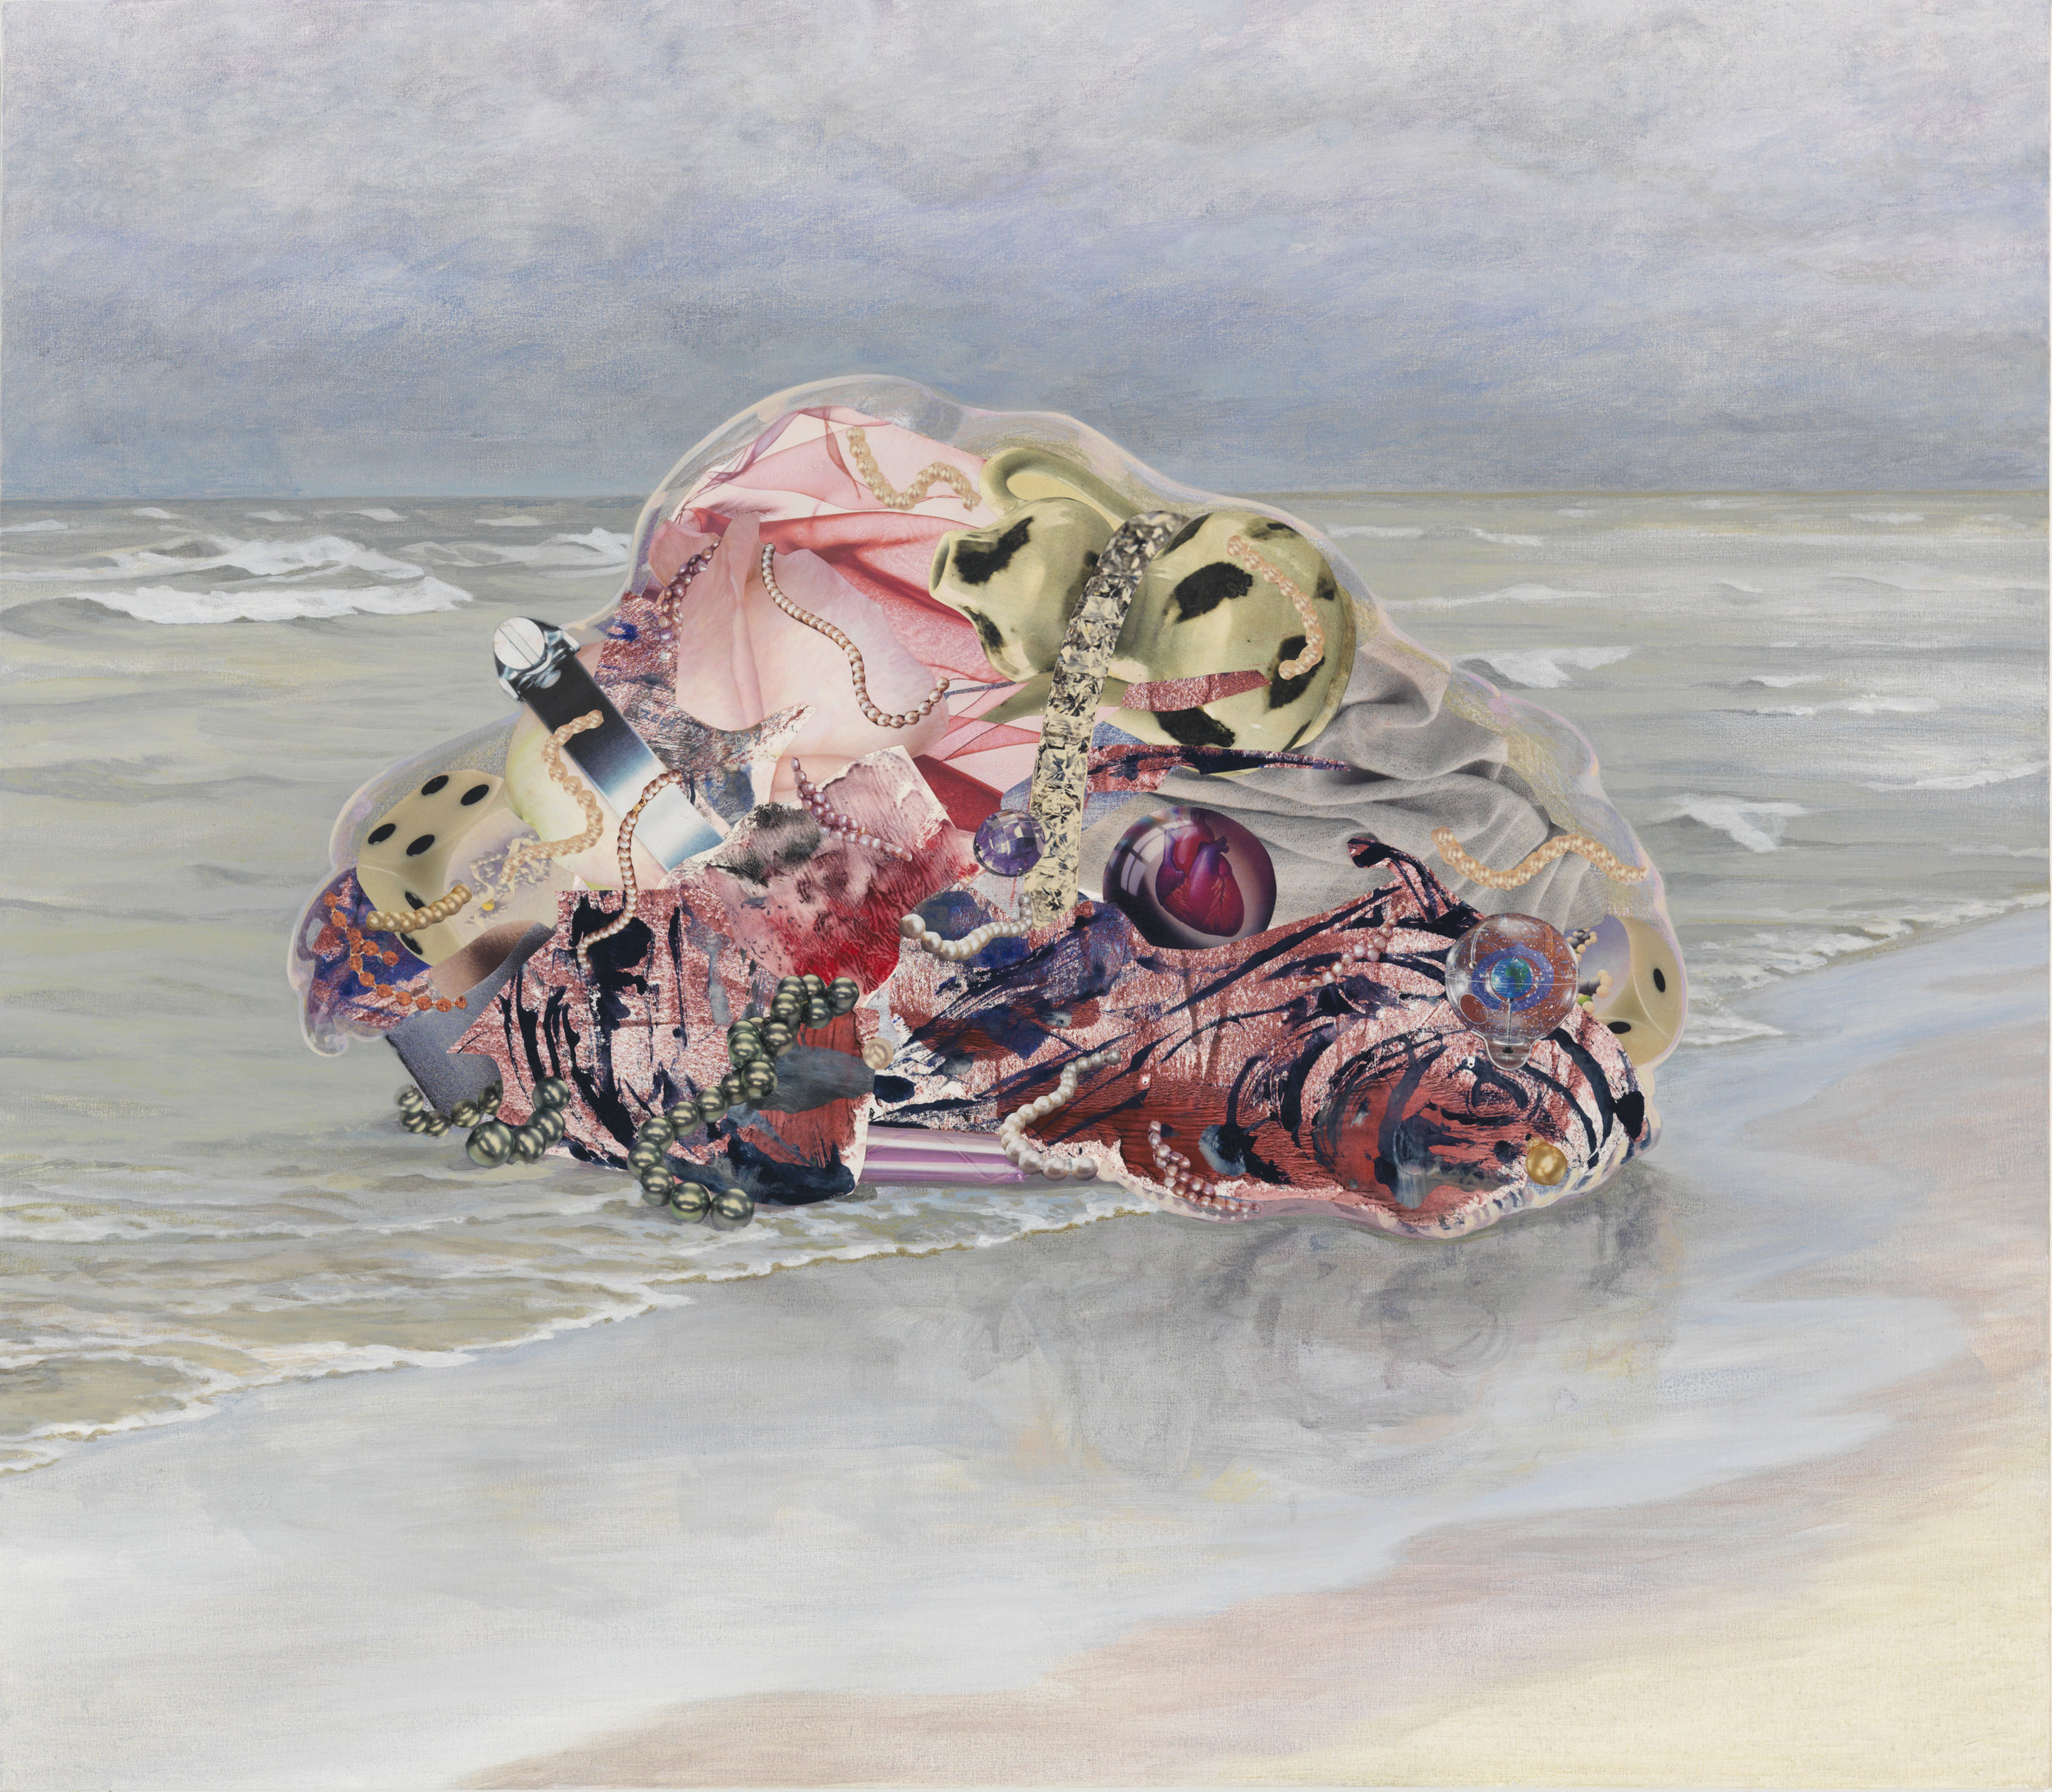  Mary Lou Zelazny,  Pink Tide , Acrylic and collage on canvas, 35 x 40”, 2009    